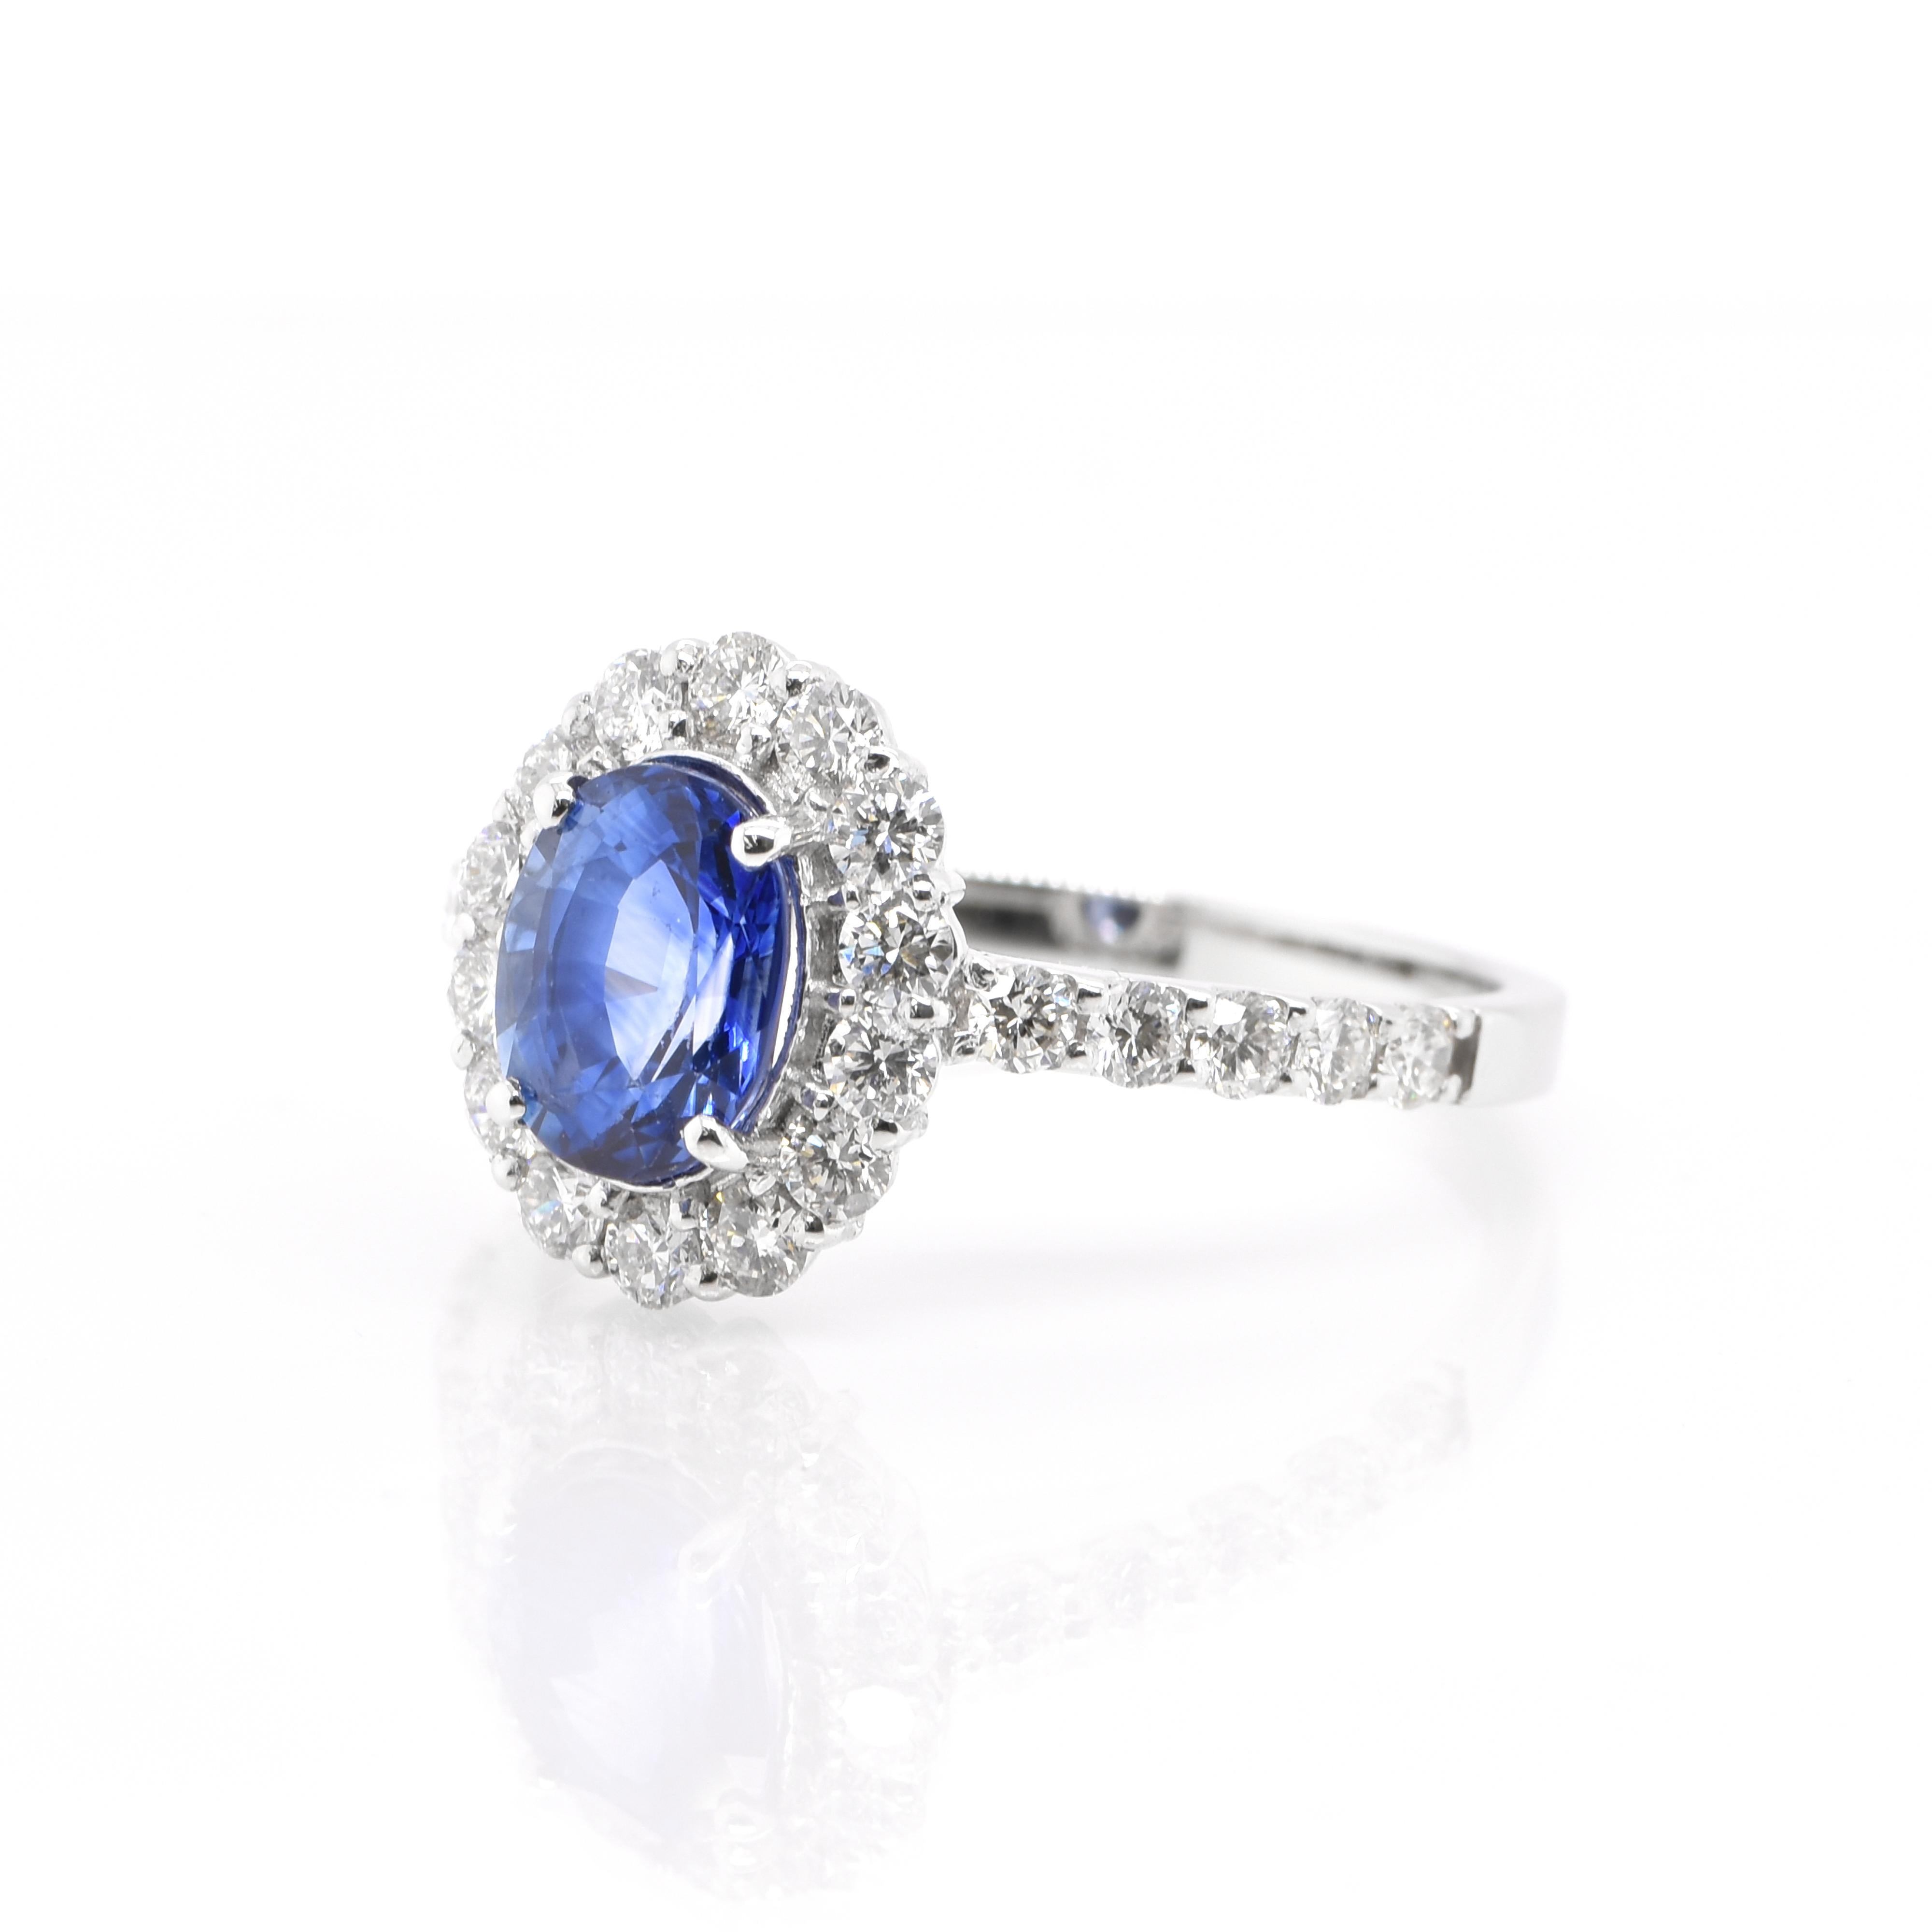 A beautiful Engagement Ring featuring a 1.44 Carat, Natural, Blue Sapphire and 0.67 Carats of Diamond Accents set in Platinum. Sapphires have extraordinary durability - they excel in hardness as well as toughness and durability making them very